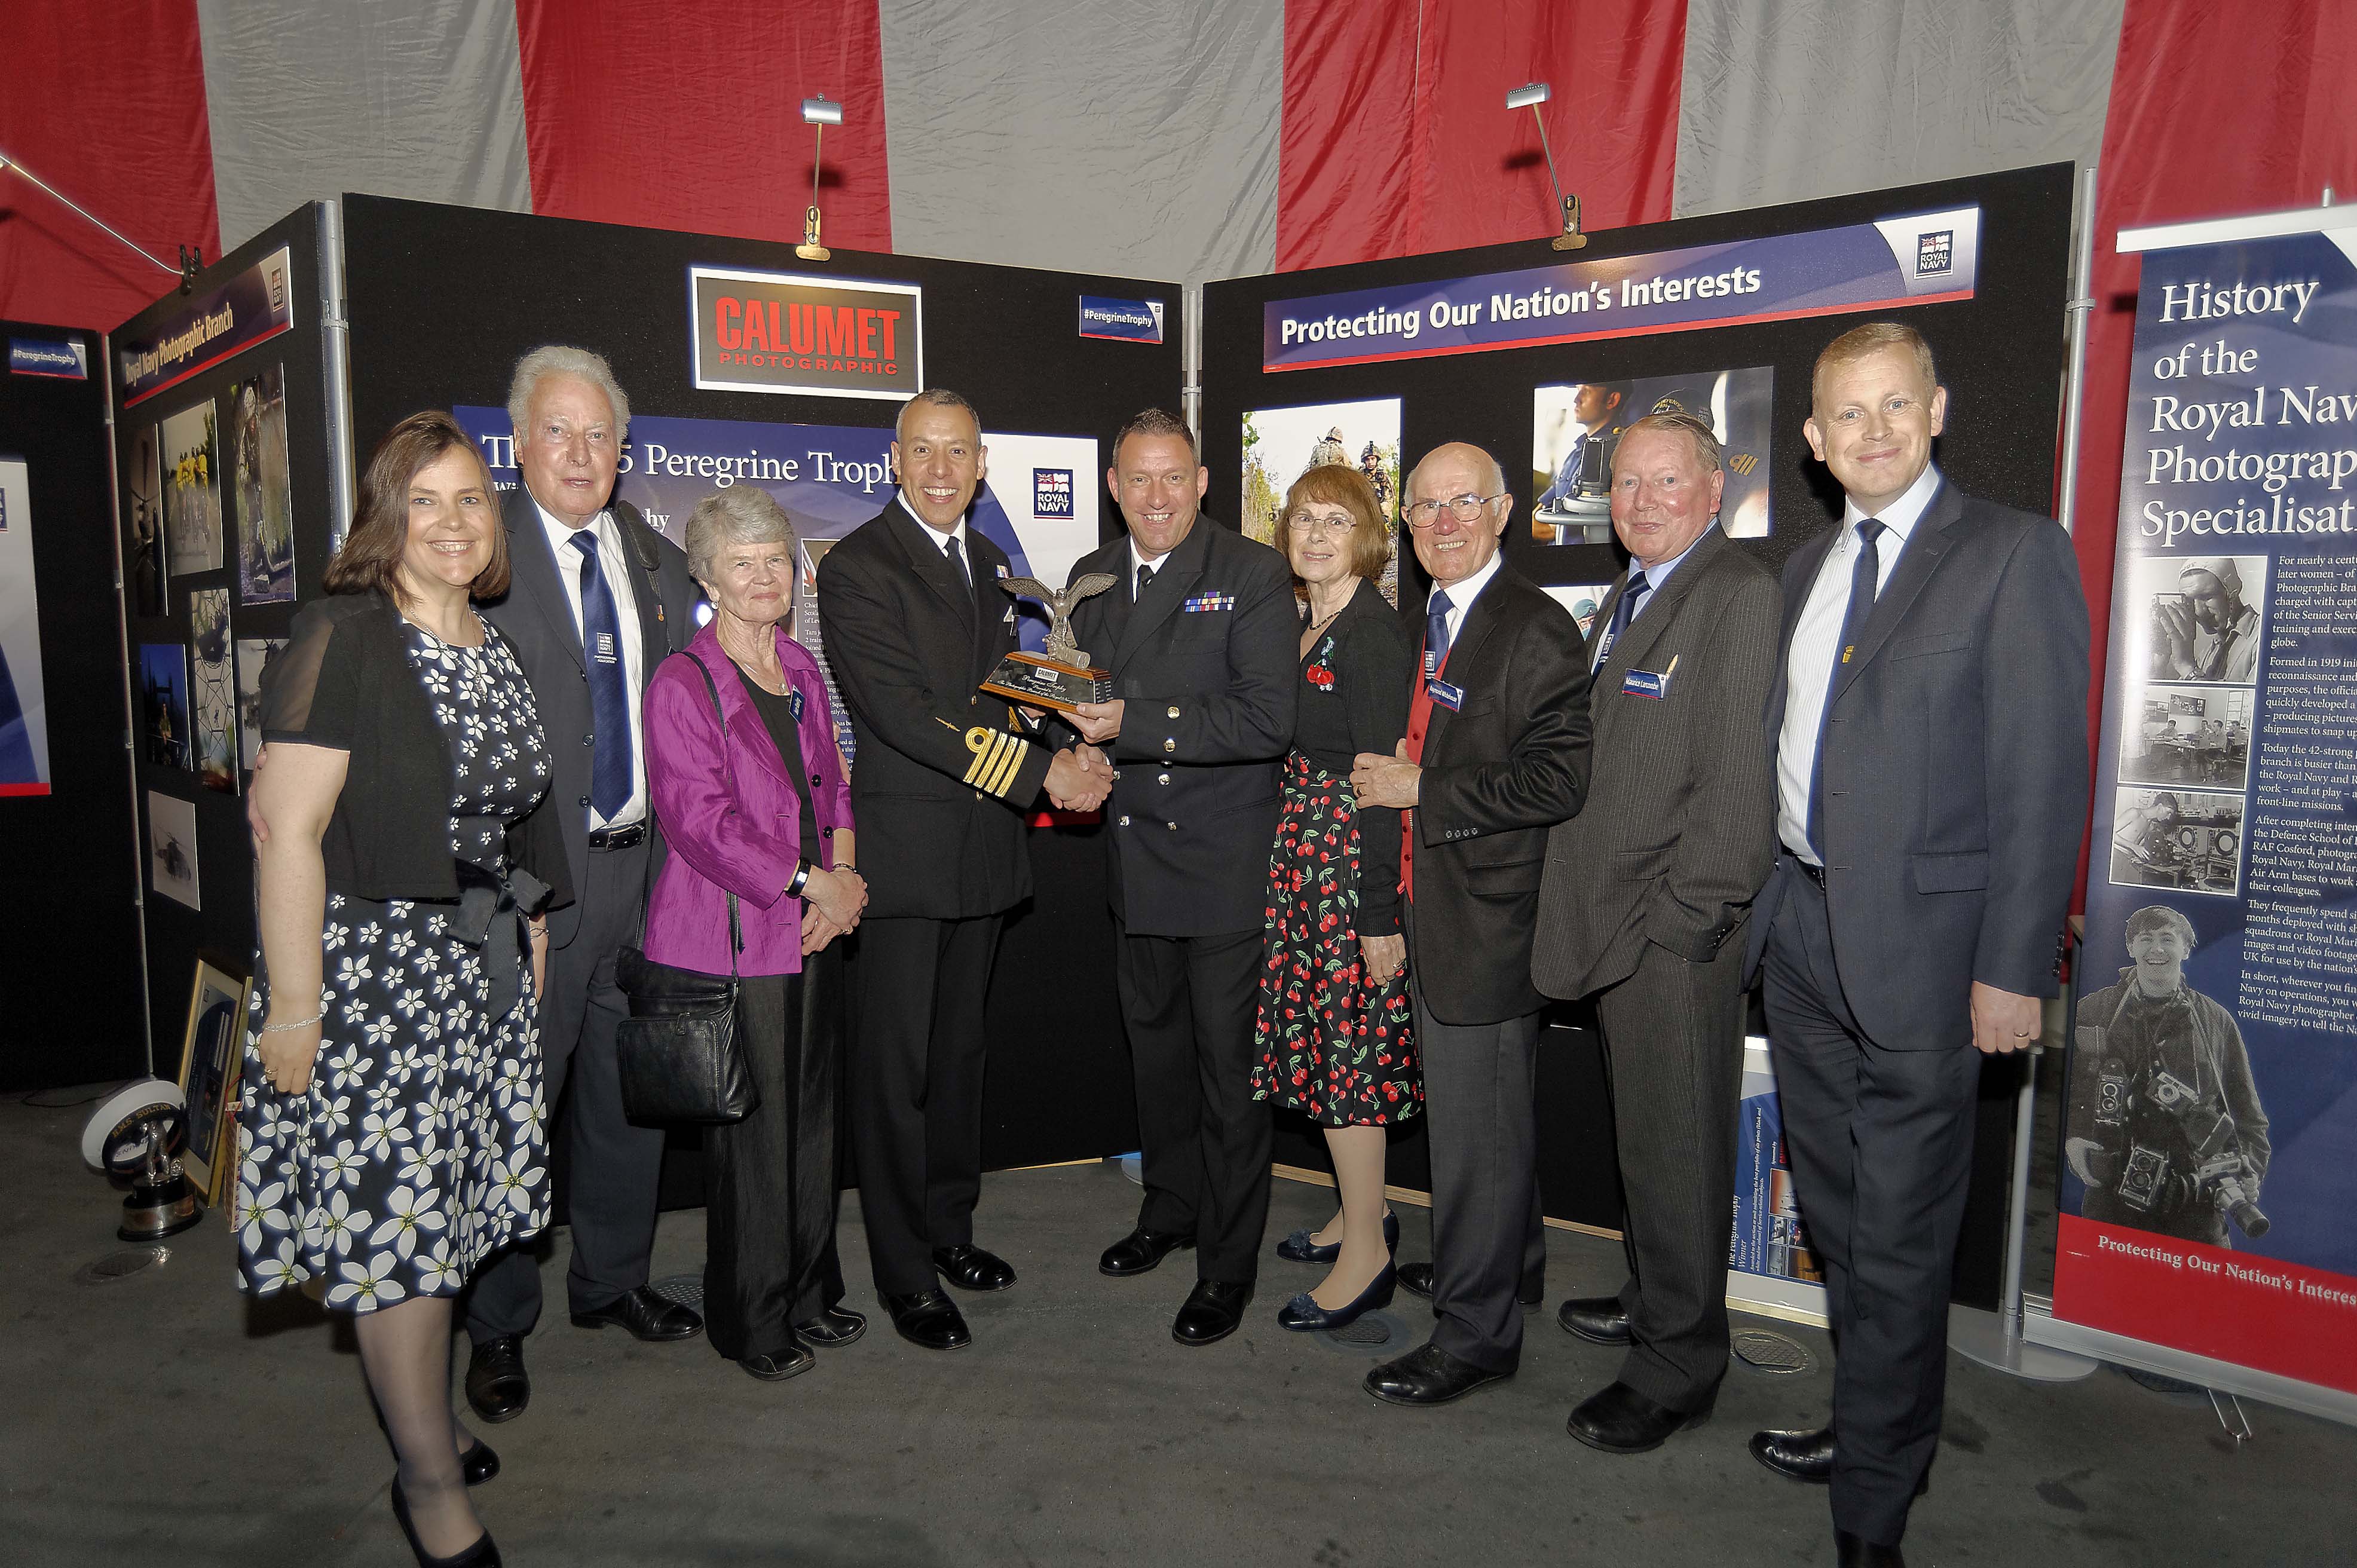 The Captain Of The Royal Navy's Media Department, with Ceremony Guests